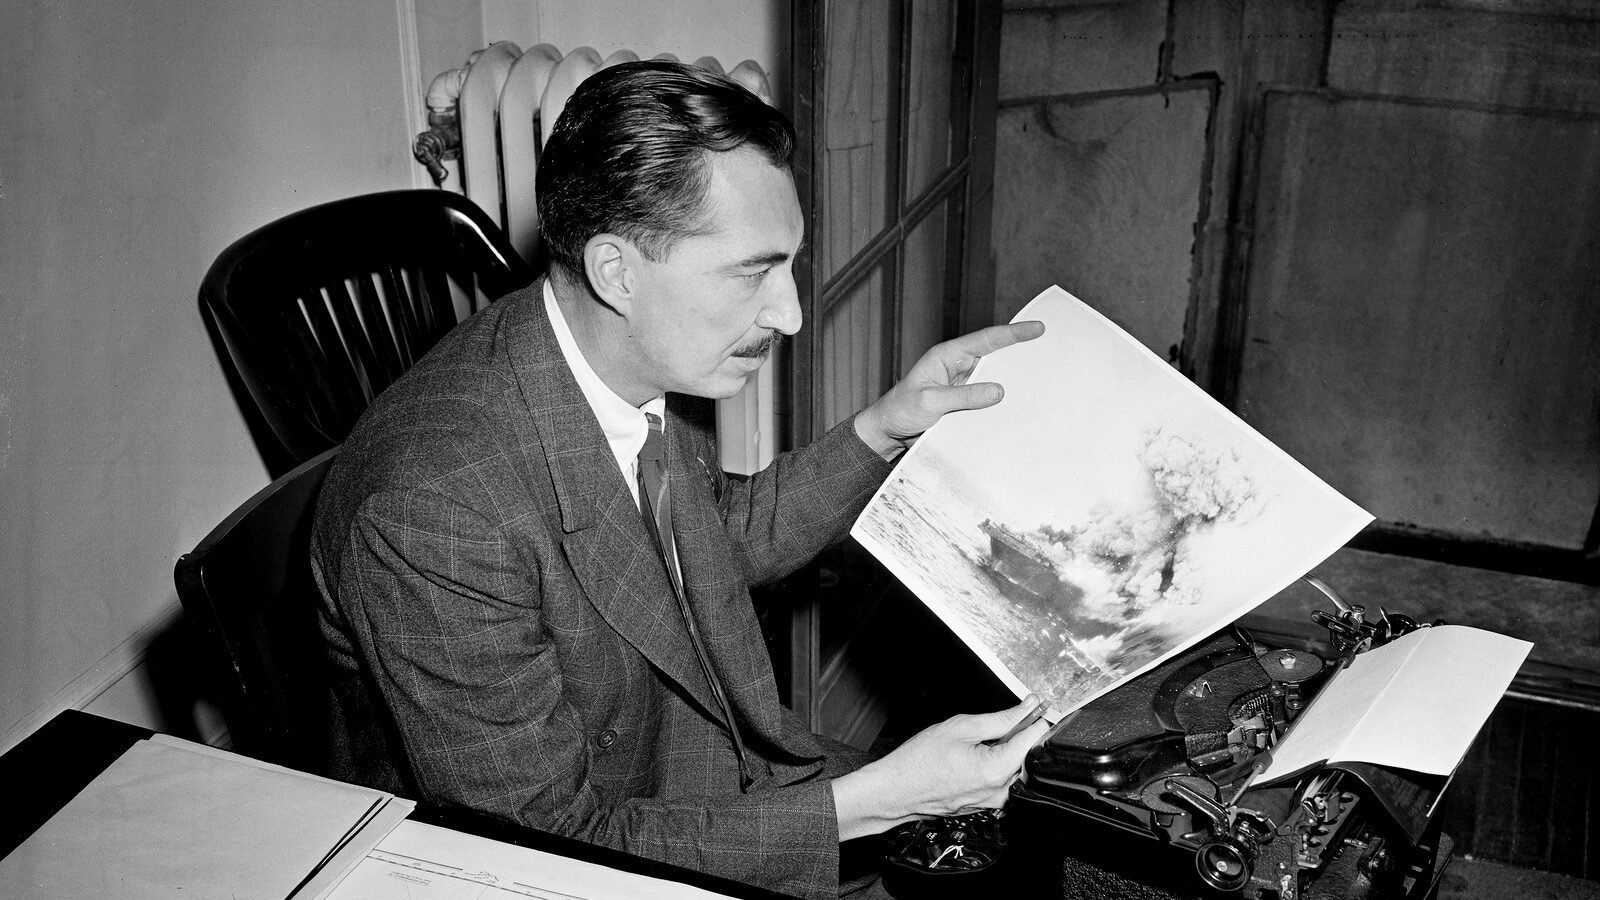 Stanley Johnston, Chicago Tribune correspondent is pictured in Chicago, June 12, 1942. The only American newsman aboard the U.S. aircraft carrier Lexington, Johnston looks at an Associated Press WirePhoto transmission of a Navy picture showing the Lexington as it exploded during the battle of Coral Sea. (AP/Paul Cannon)